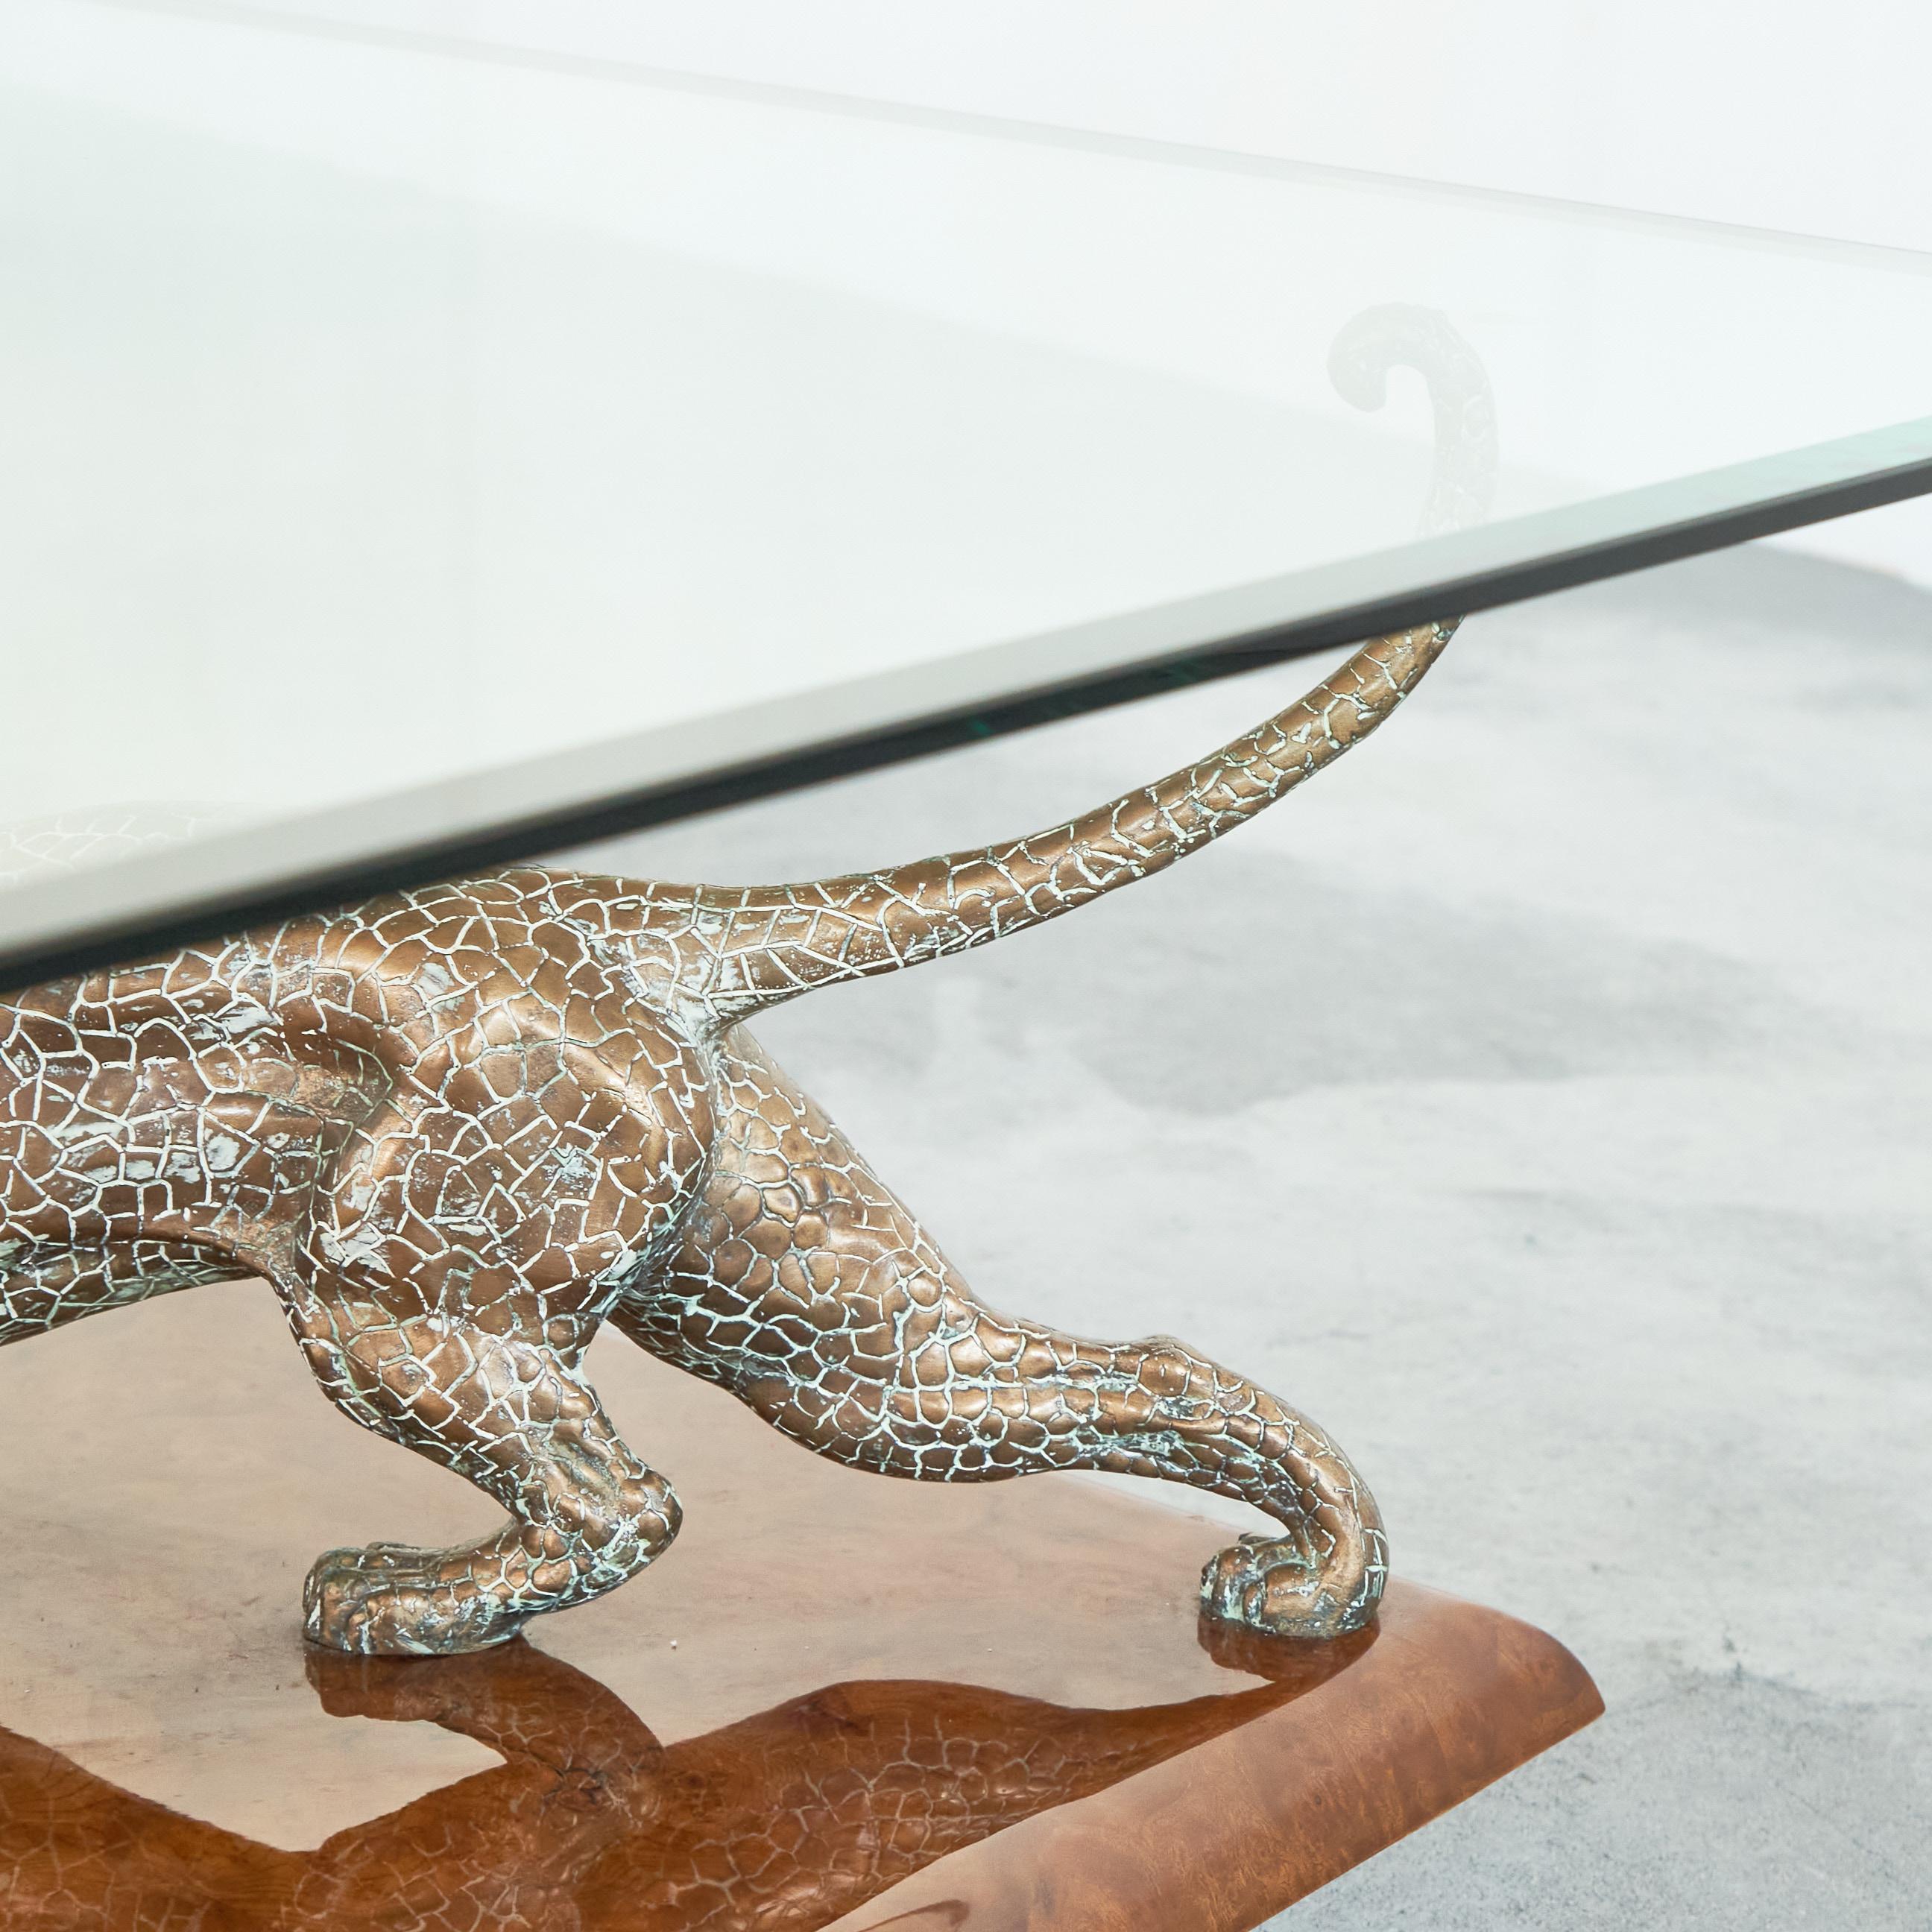 Nicola Voci 'Jaguar' Coffee Table in Bronze, Burl Wood and Beveled Glass 1970s For Sale 1